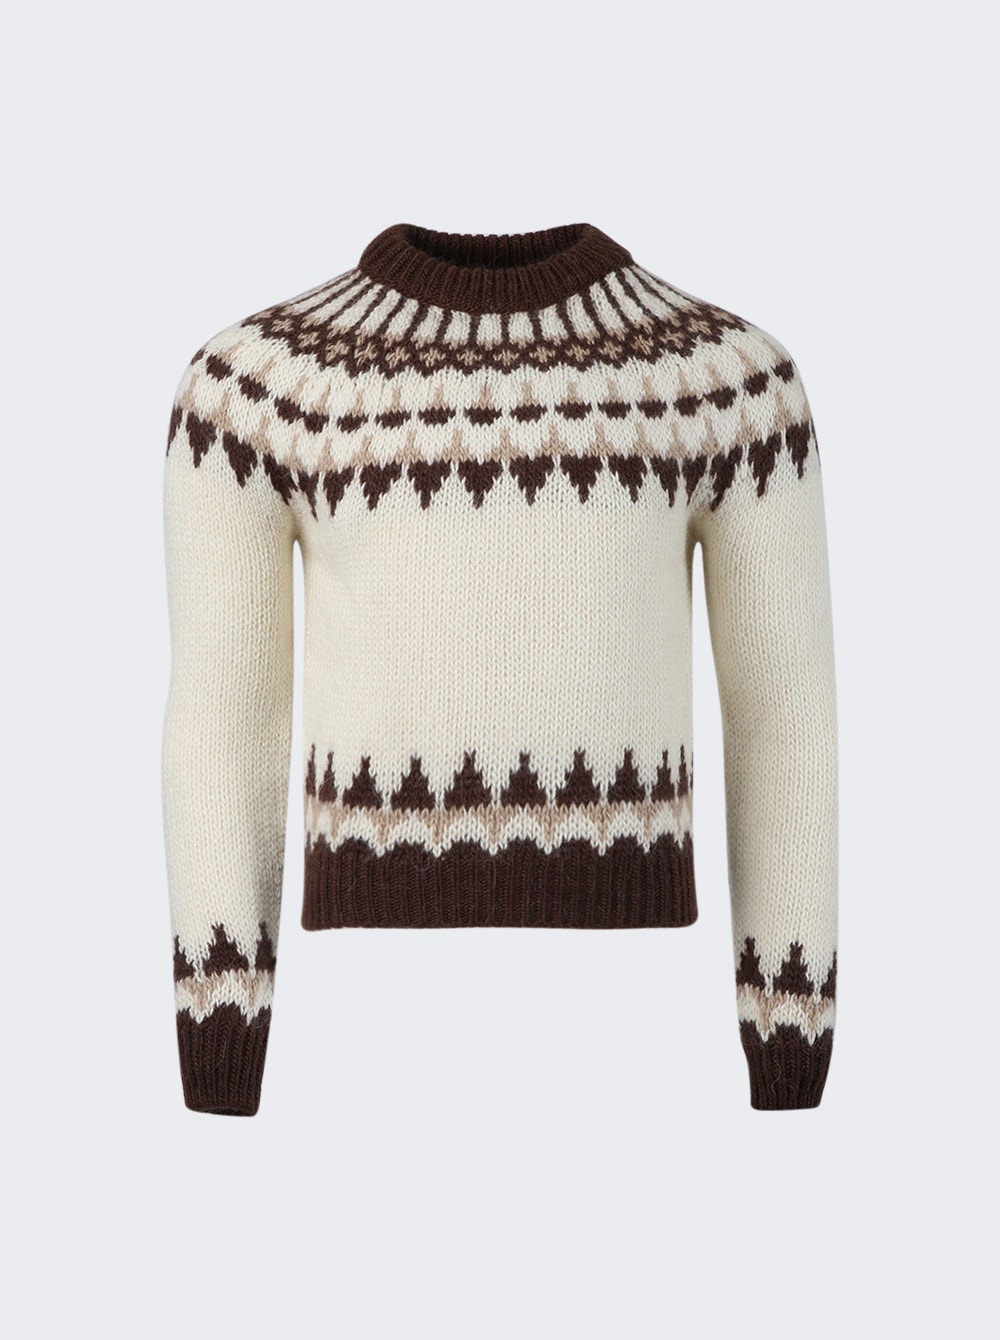 Knit Sweater Beige And Maroon - 1